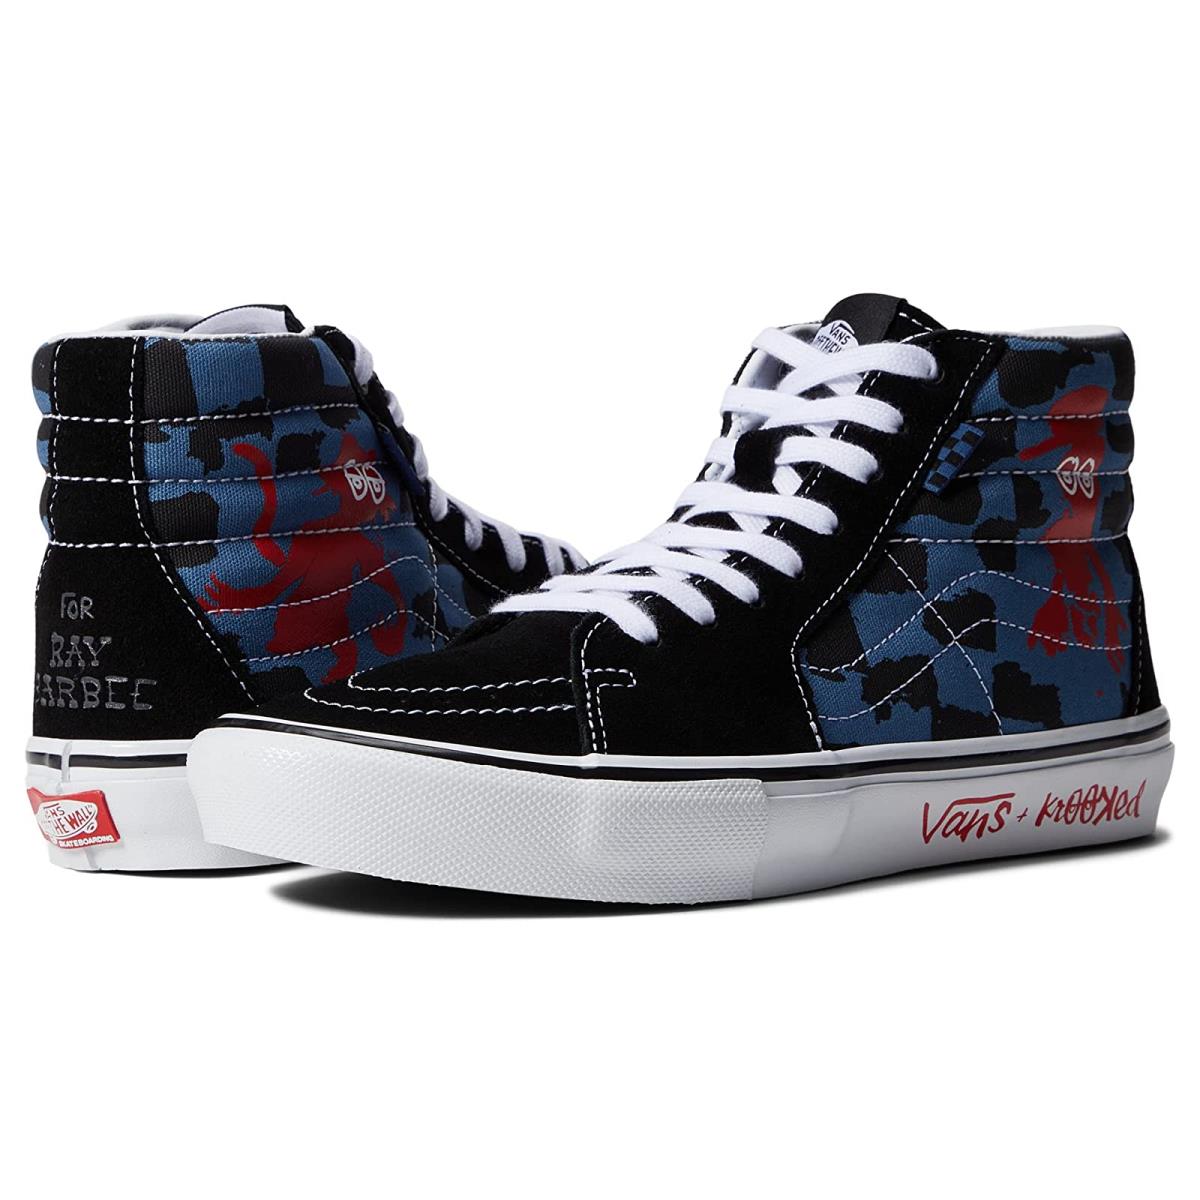 Man`s Sneakers Athletic Shoes Vans Skate SK8-Hi (Krooked By Natas For Ray) Blue